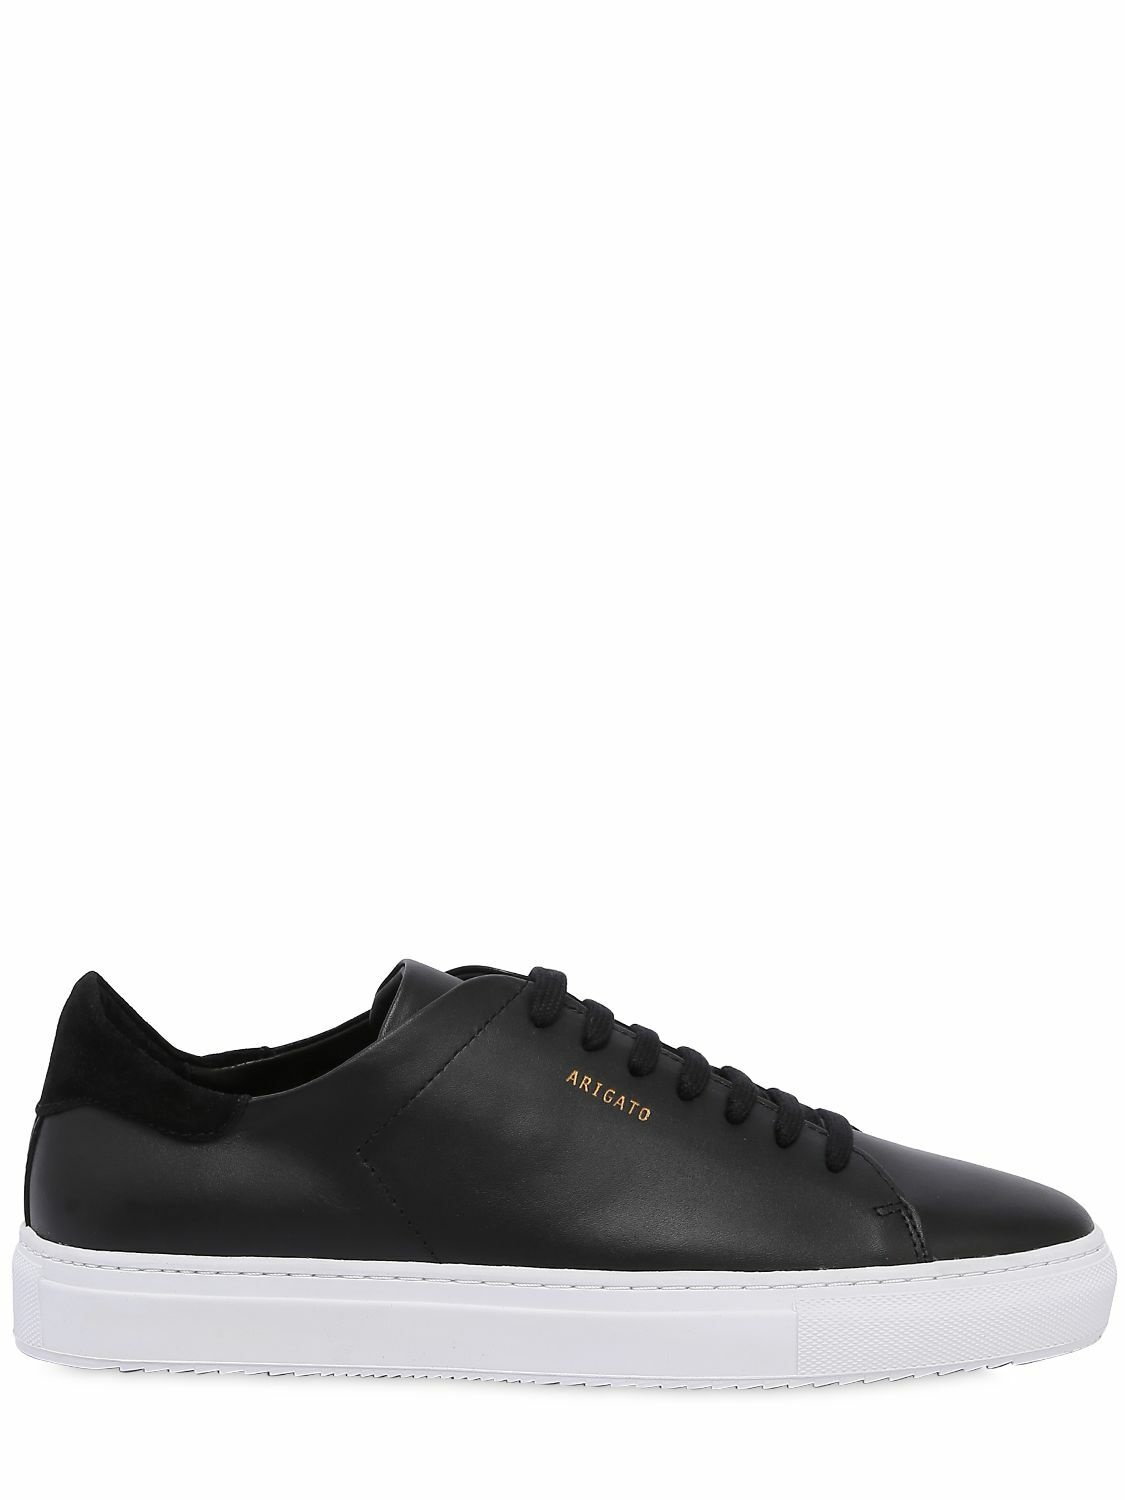 Photo: AXEL ARIGATO Clean 90 Brushed Leather Sneakers